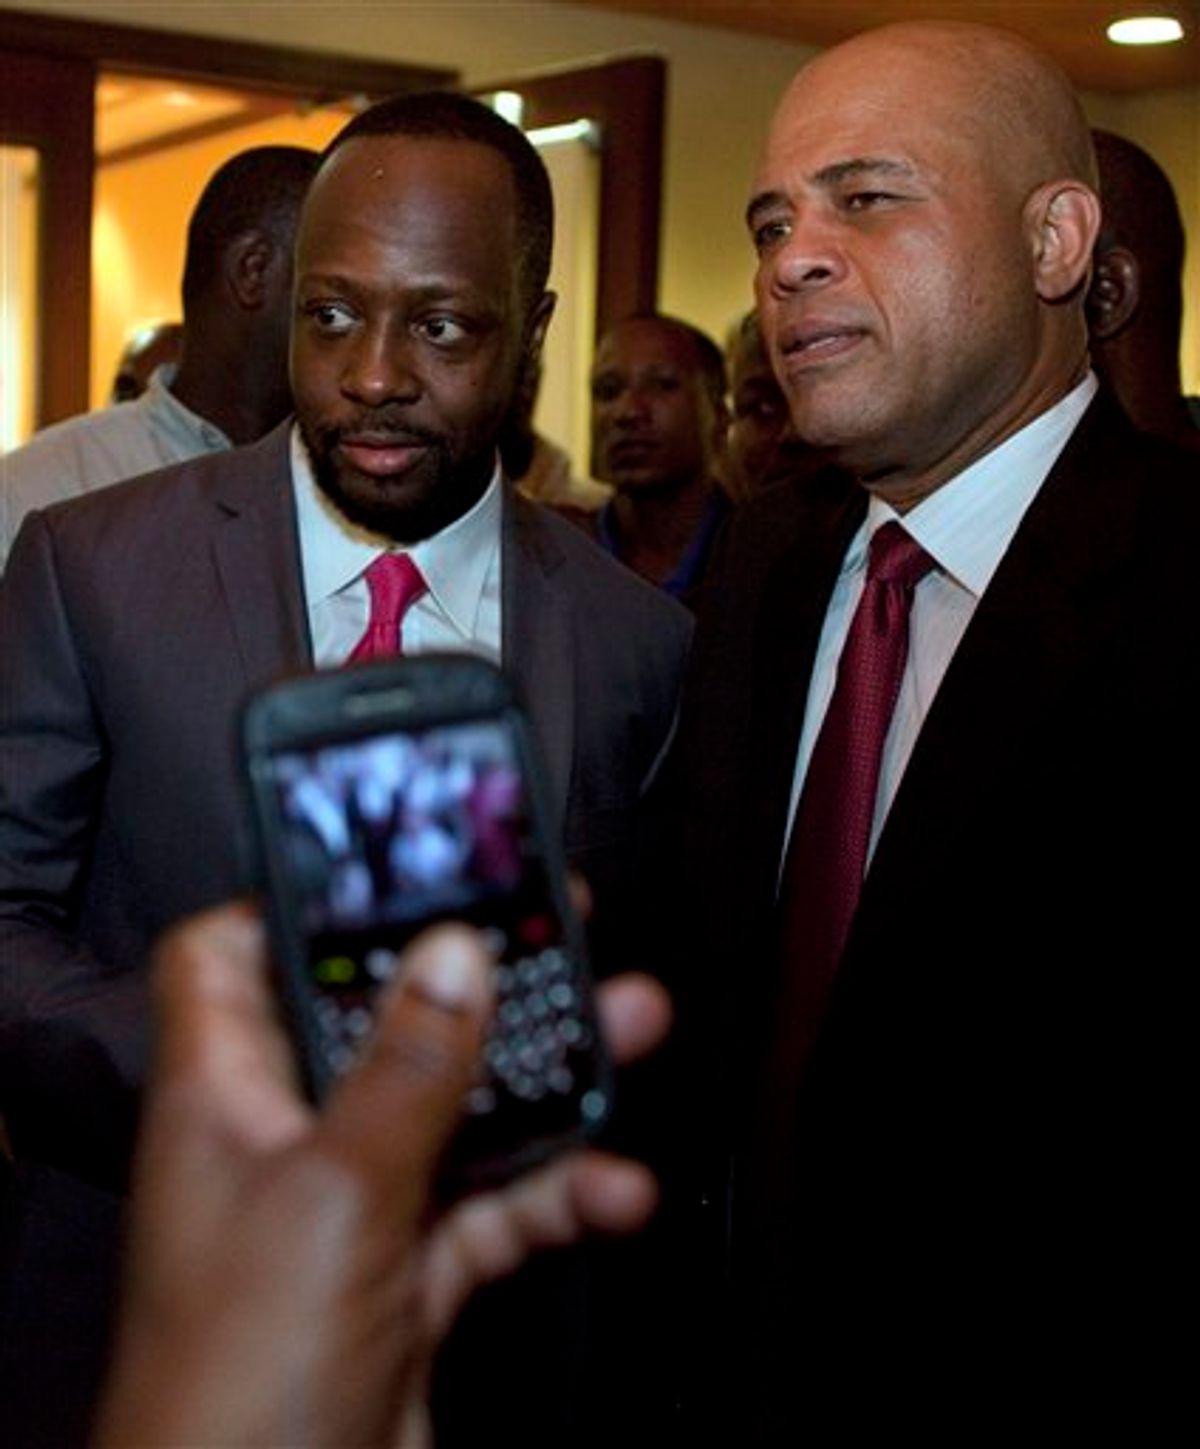 A person takes a photo with a mobile phone of Haiti's presidential candidate Michel Martelly, right, and Haitian-born singer Wyclef Jean after a press conference in which Jean announced his support on Martelly's run for the presidency in Port-au-Prince, Haiti, Wednesday, Feb. 16, 2011. (AP Photo/Ramon Espinosa) (AP)